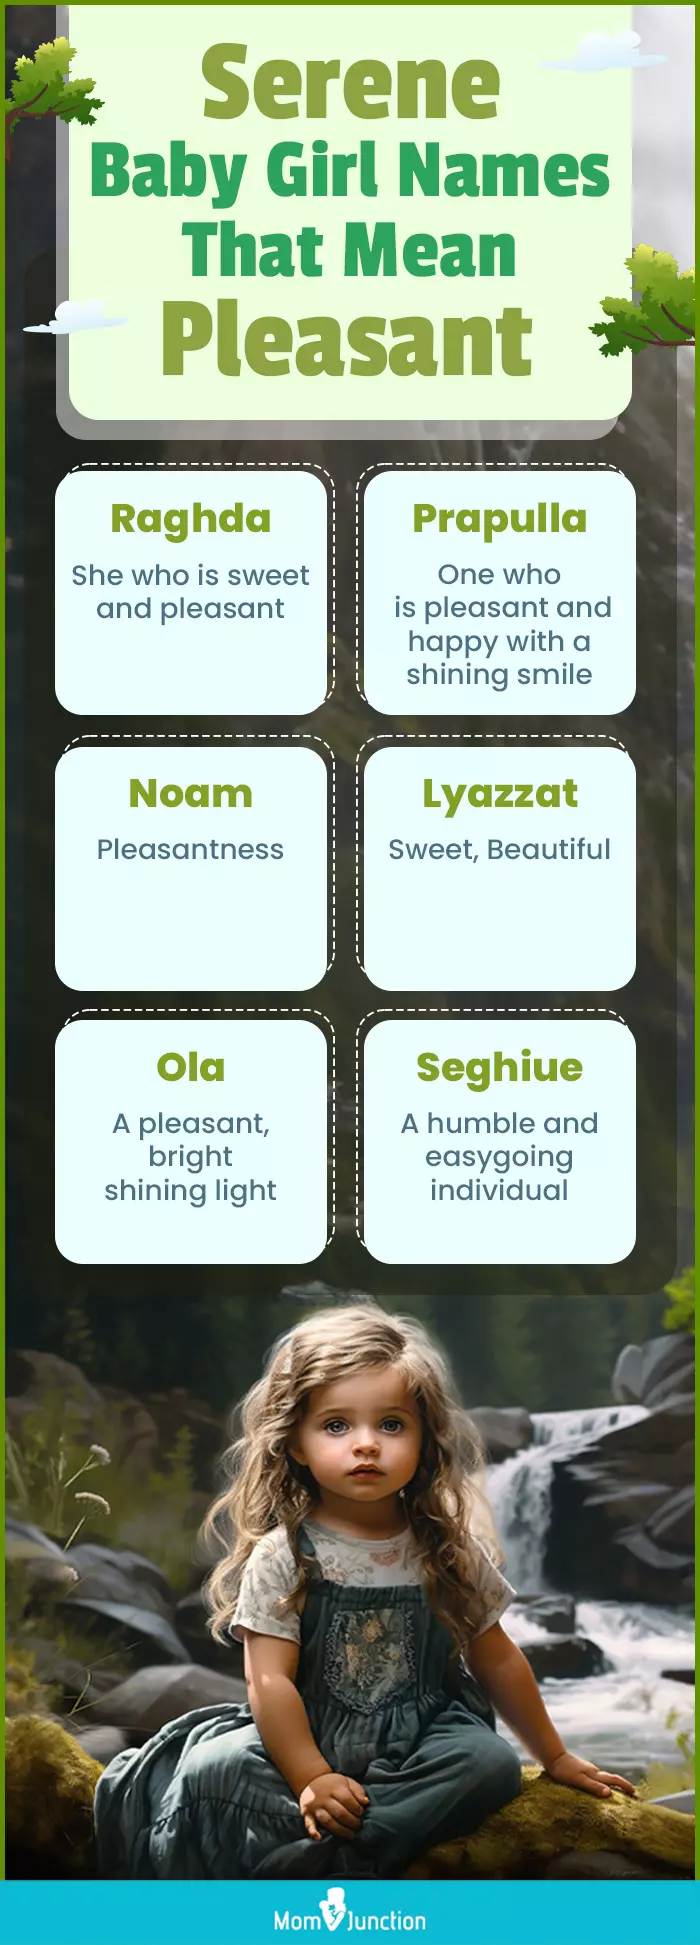 Serene Baby Girl Names That Mean Pleasant (infographic)